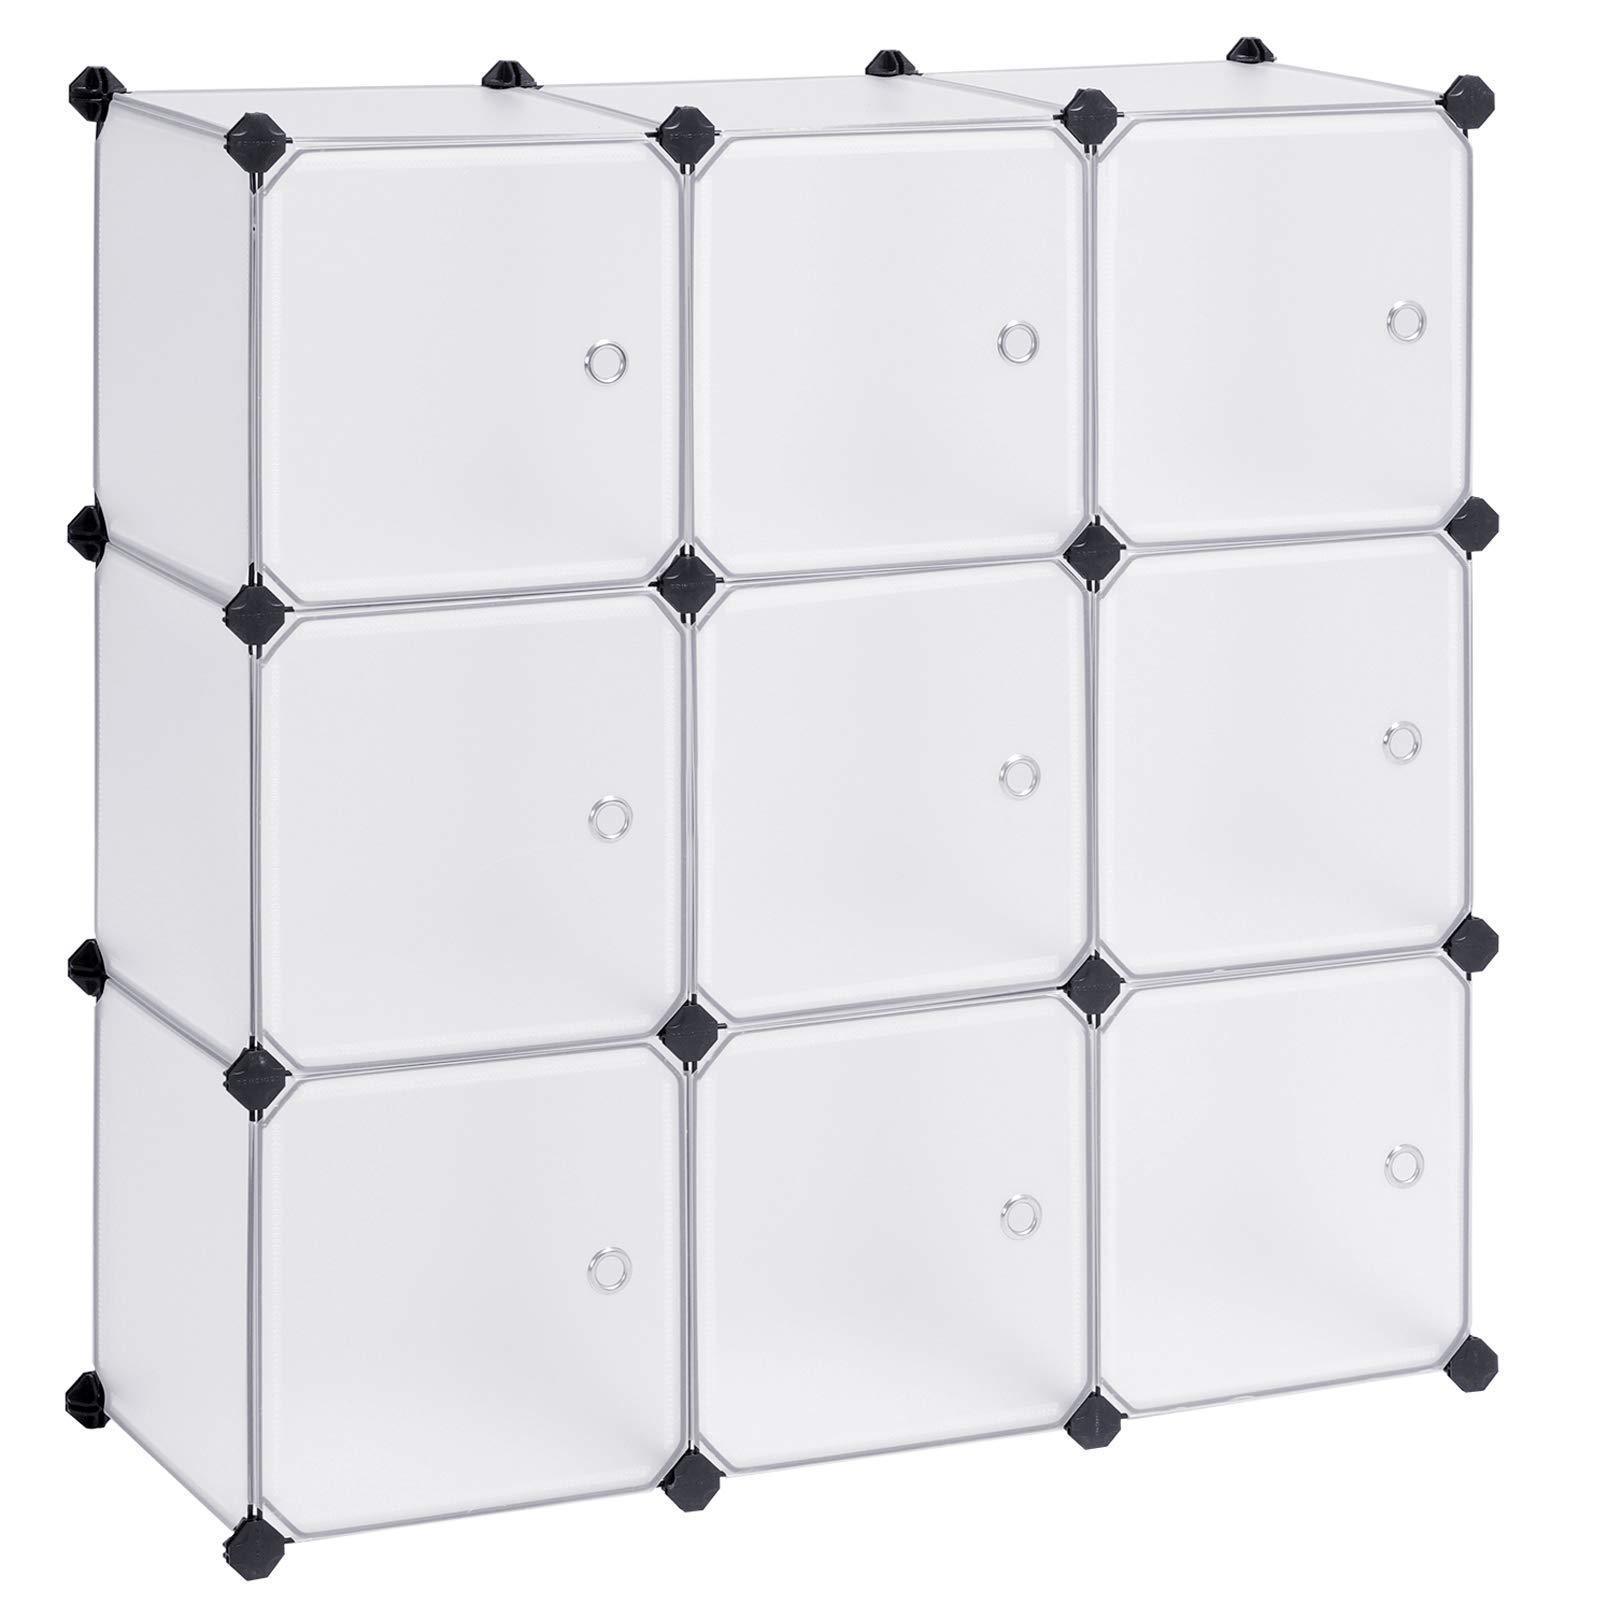 Discover the songmics cube storage organizer 9 cube diy plastic closet cabinet modular bookcase storage shelving with doors for bedroom living room office 36 7 l x 12 2 w x 36 7 h inches white ulpc116wsv1